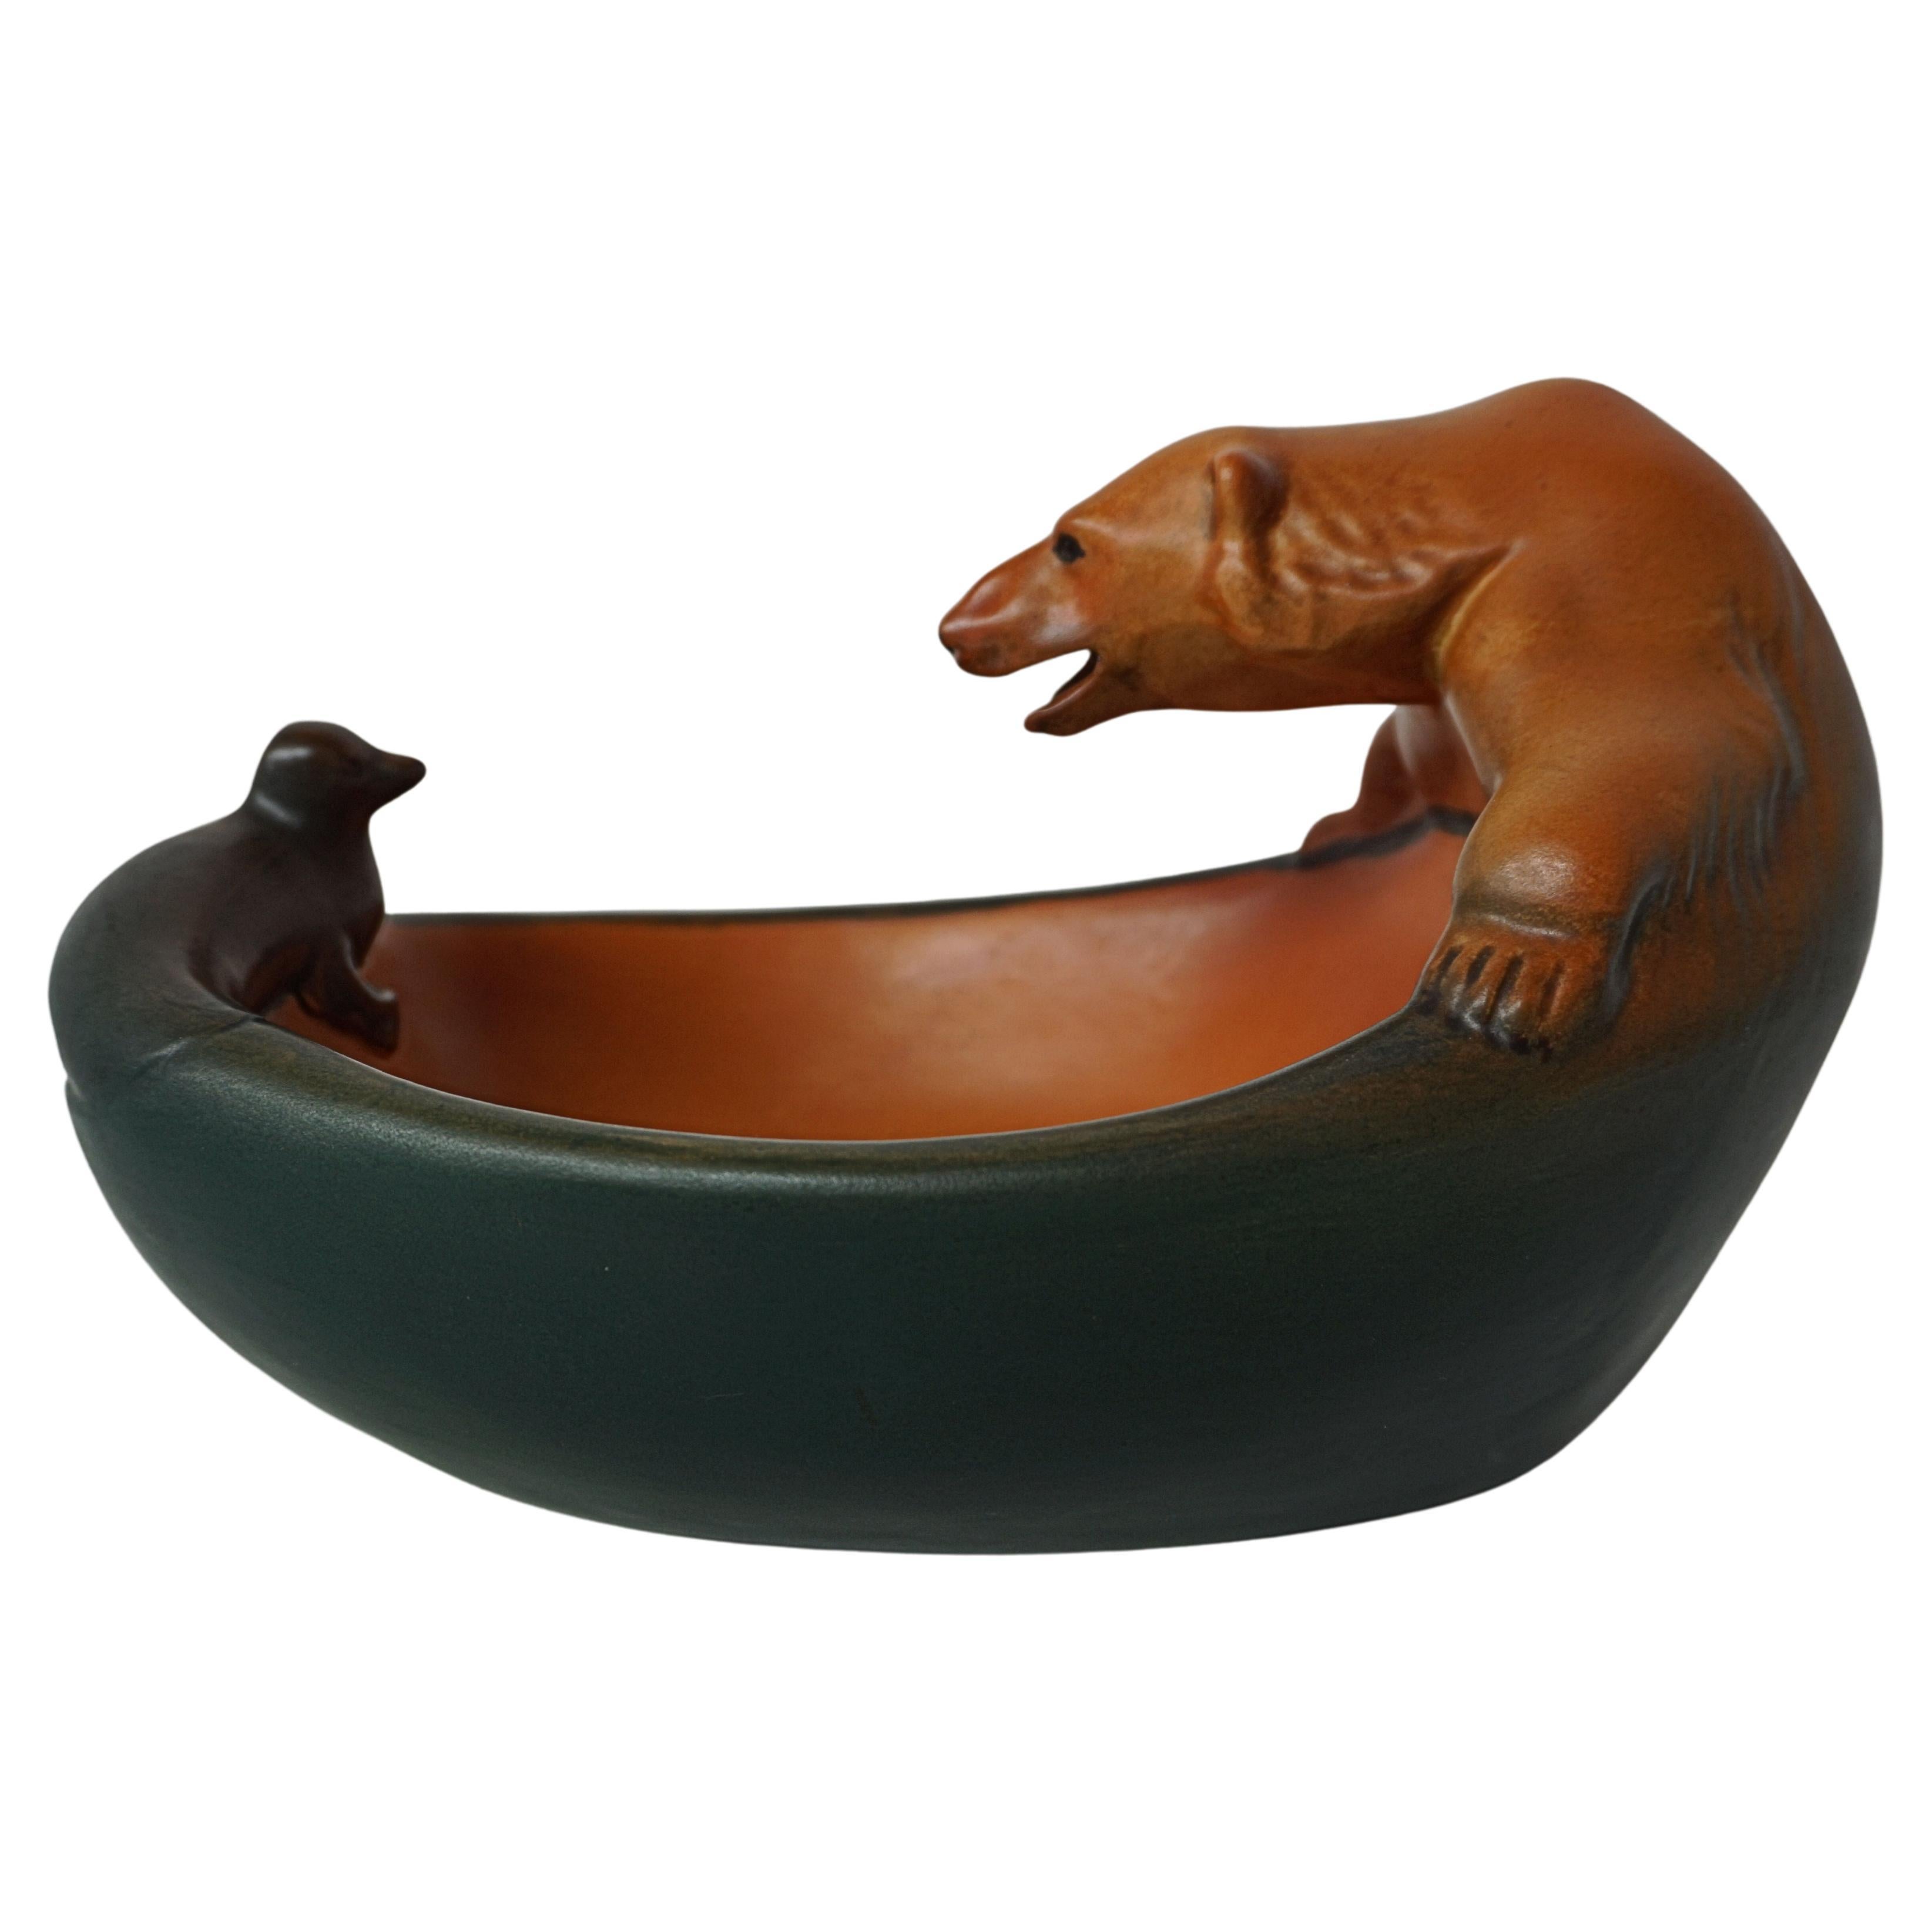 Danish Art Nouveau Handcrafted Icebear and Seal Bowl by P. Ipsens Enke For Sale